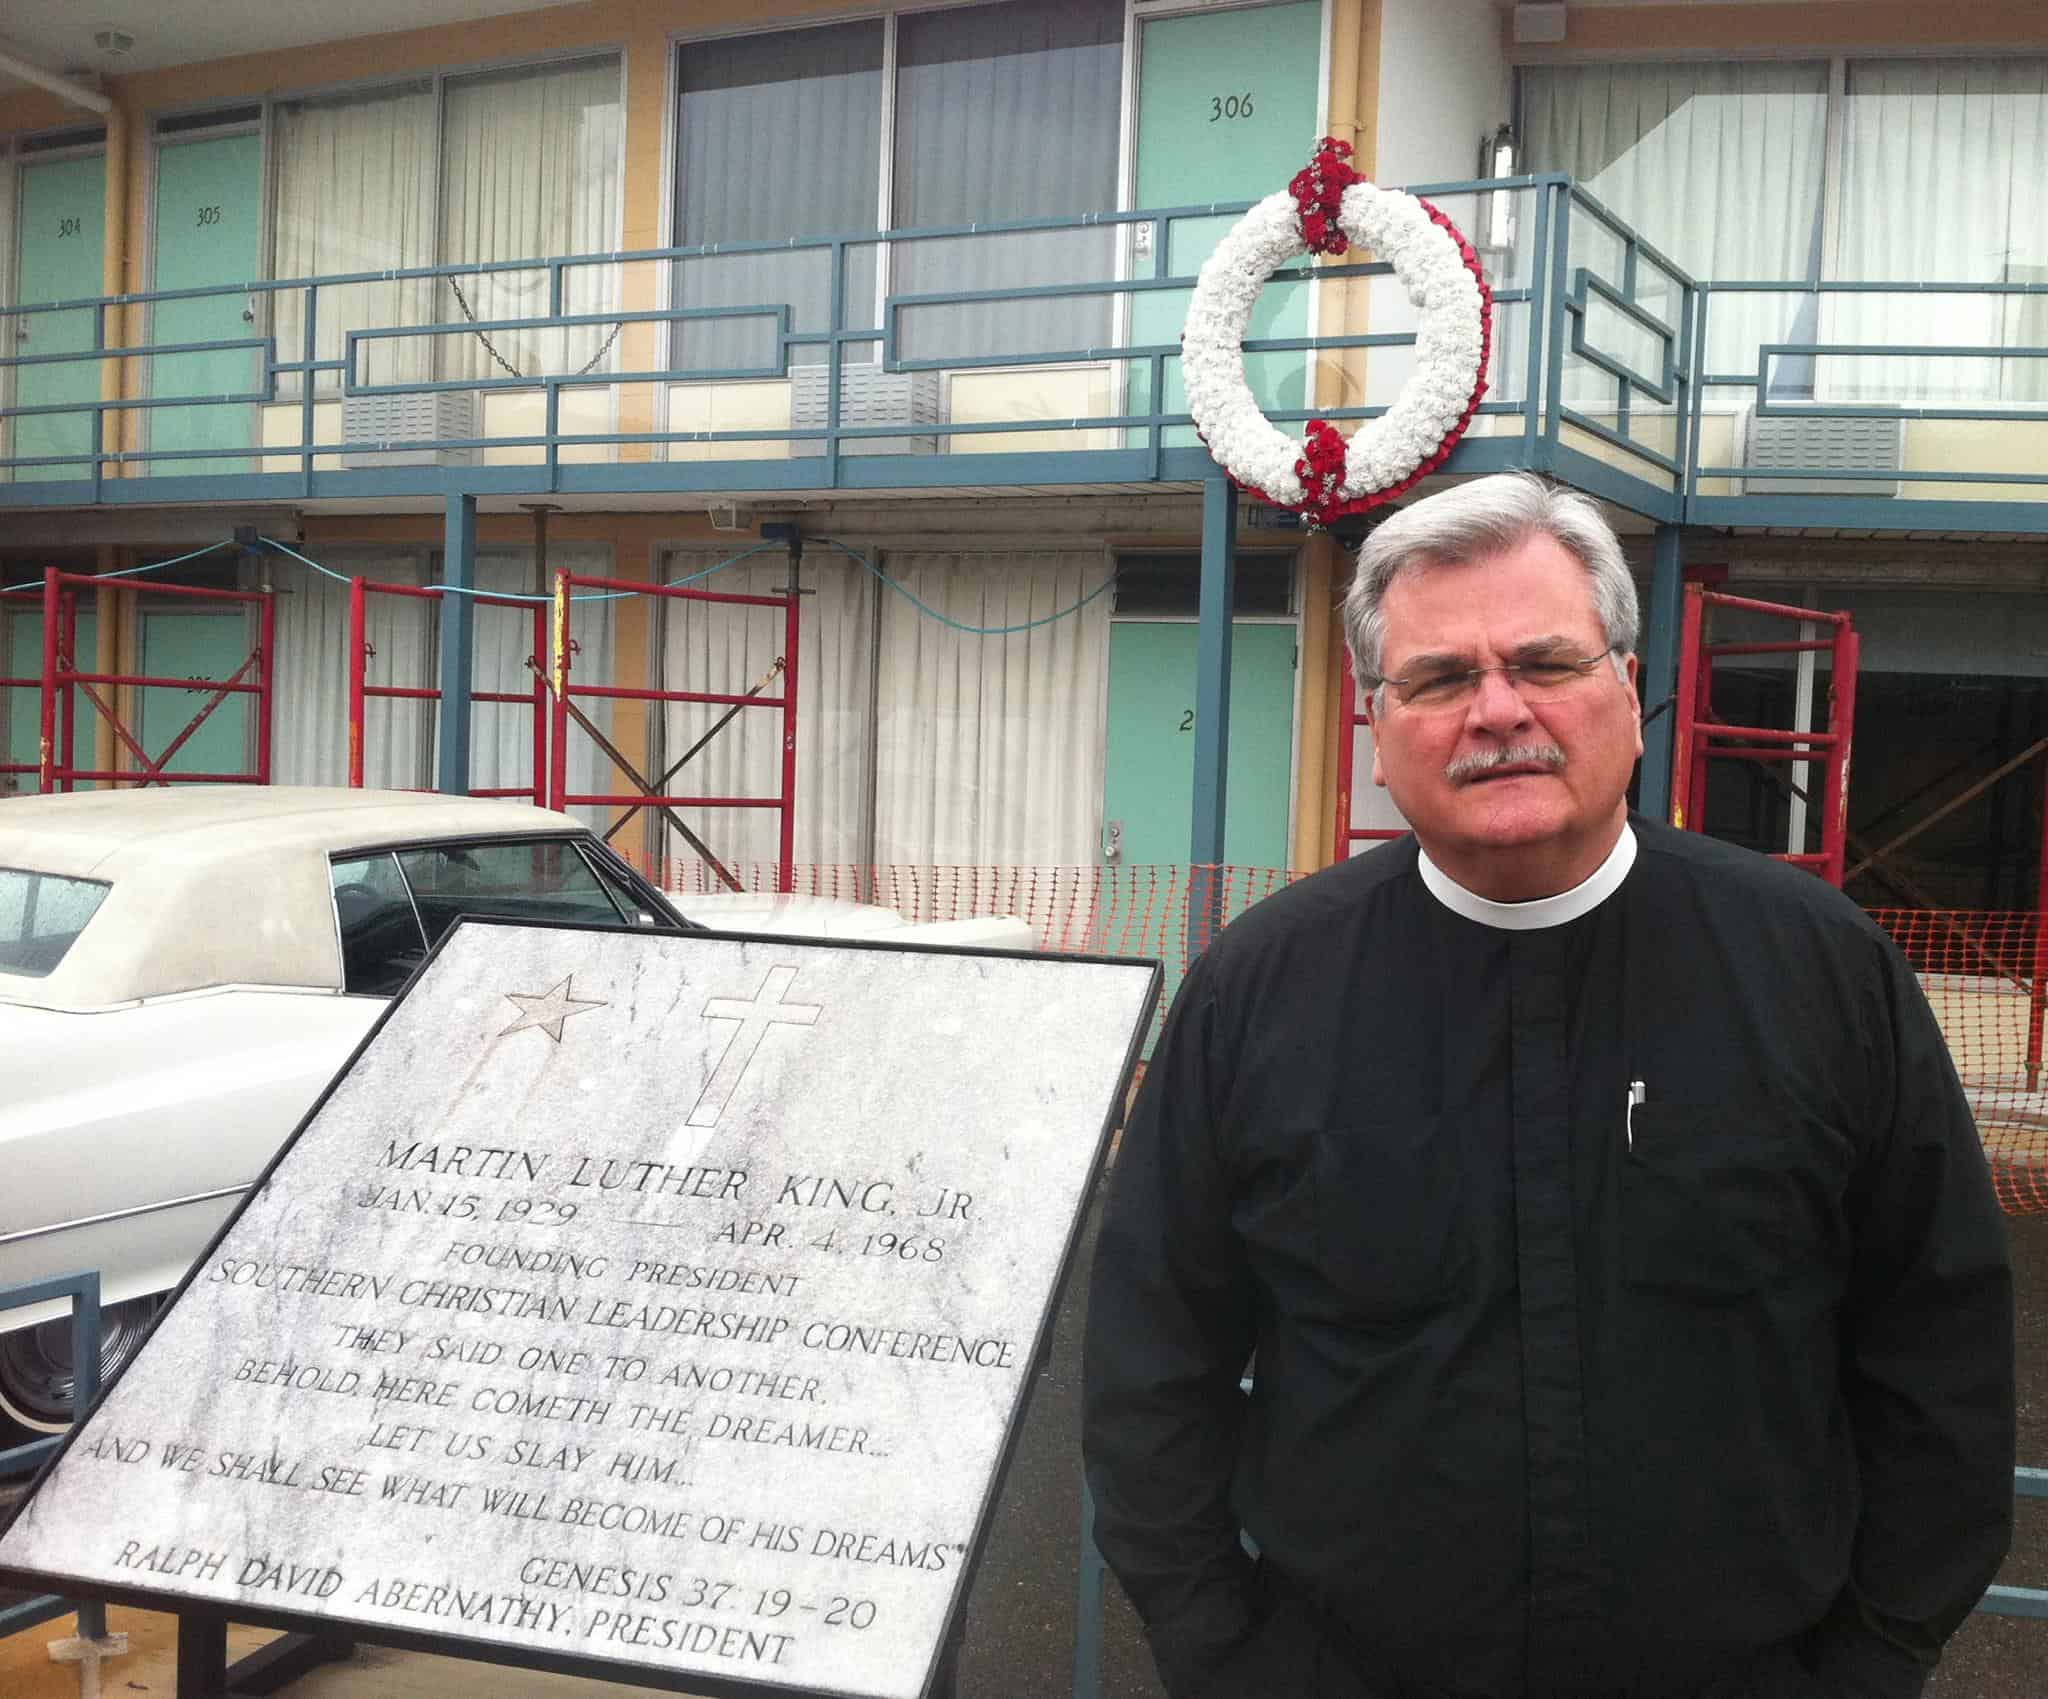 Pastor in his collar standing at the plaque commemorating the location where Martin Luther King Jr. was assassinated.